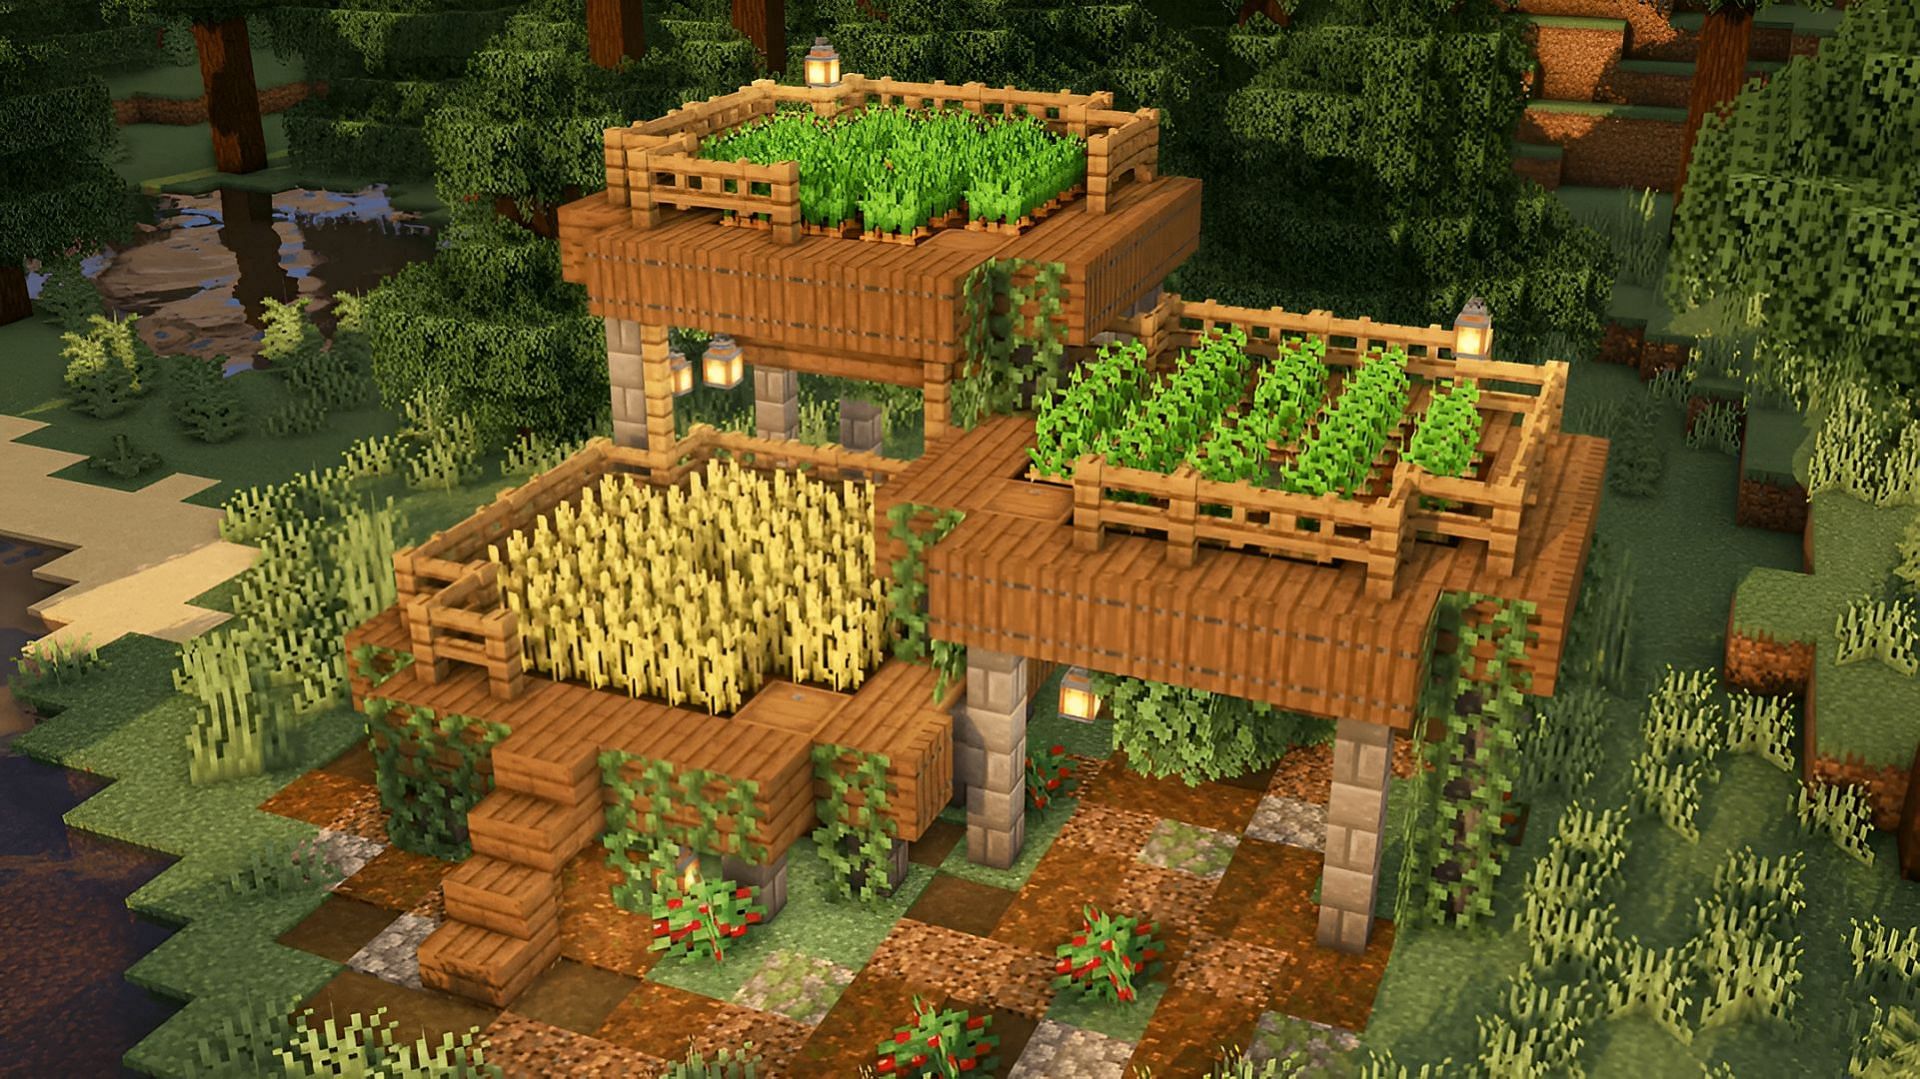 This Minecraft garden operates much like the terrace concept, but with its own distinct spin (Image via TeaLeafMC/Reddit)